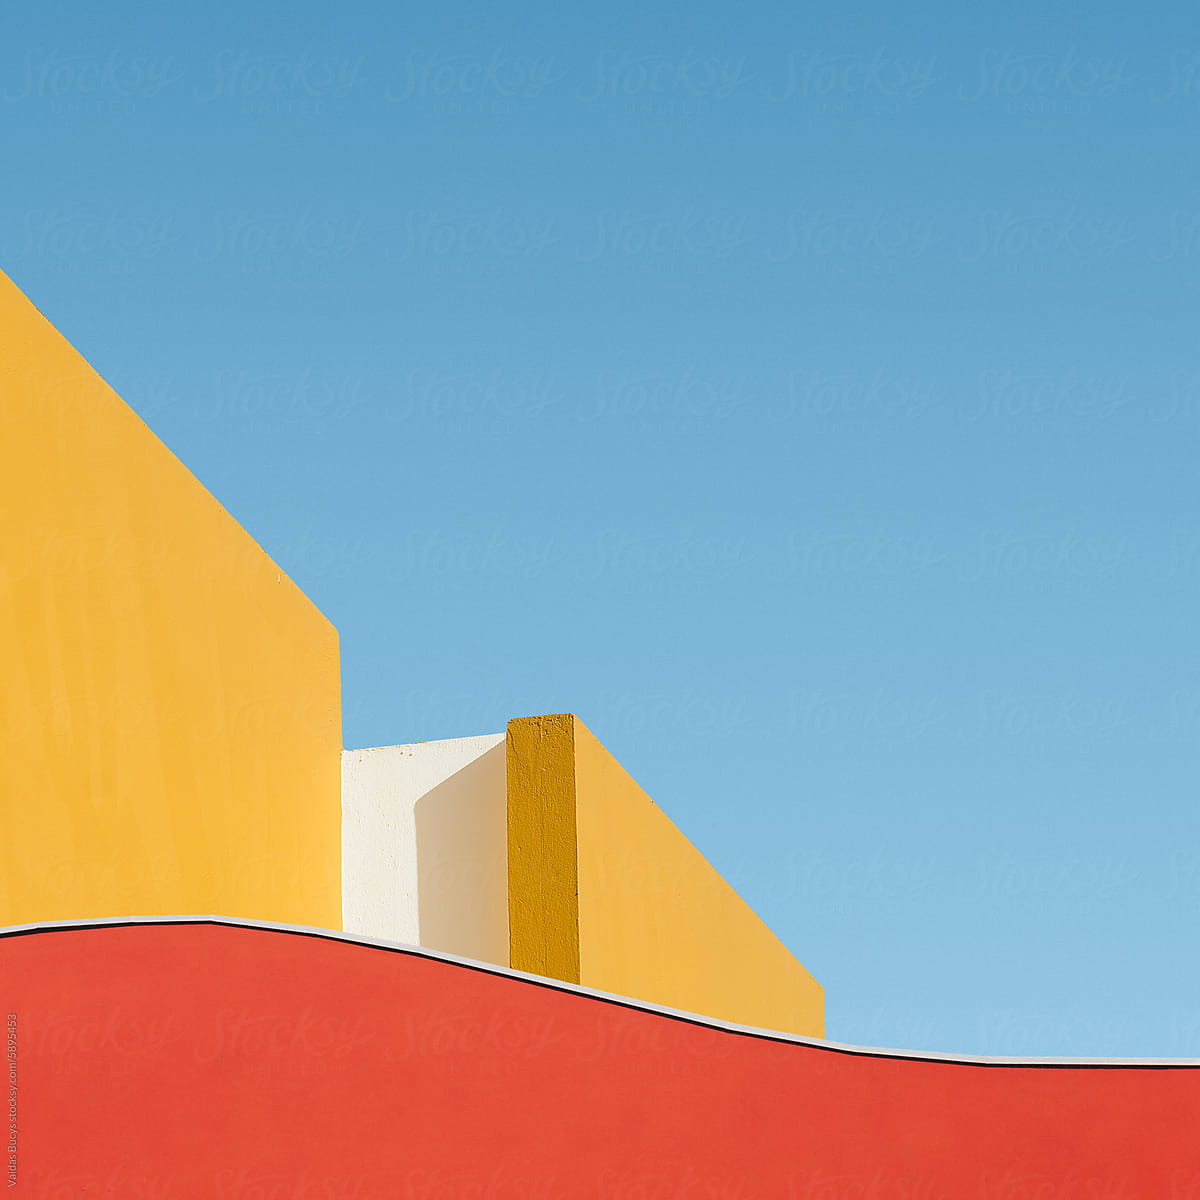 Colorful geometric shape of building wall against blue sky